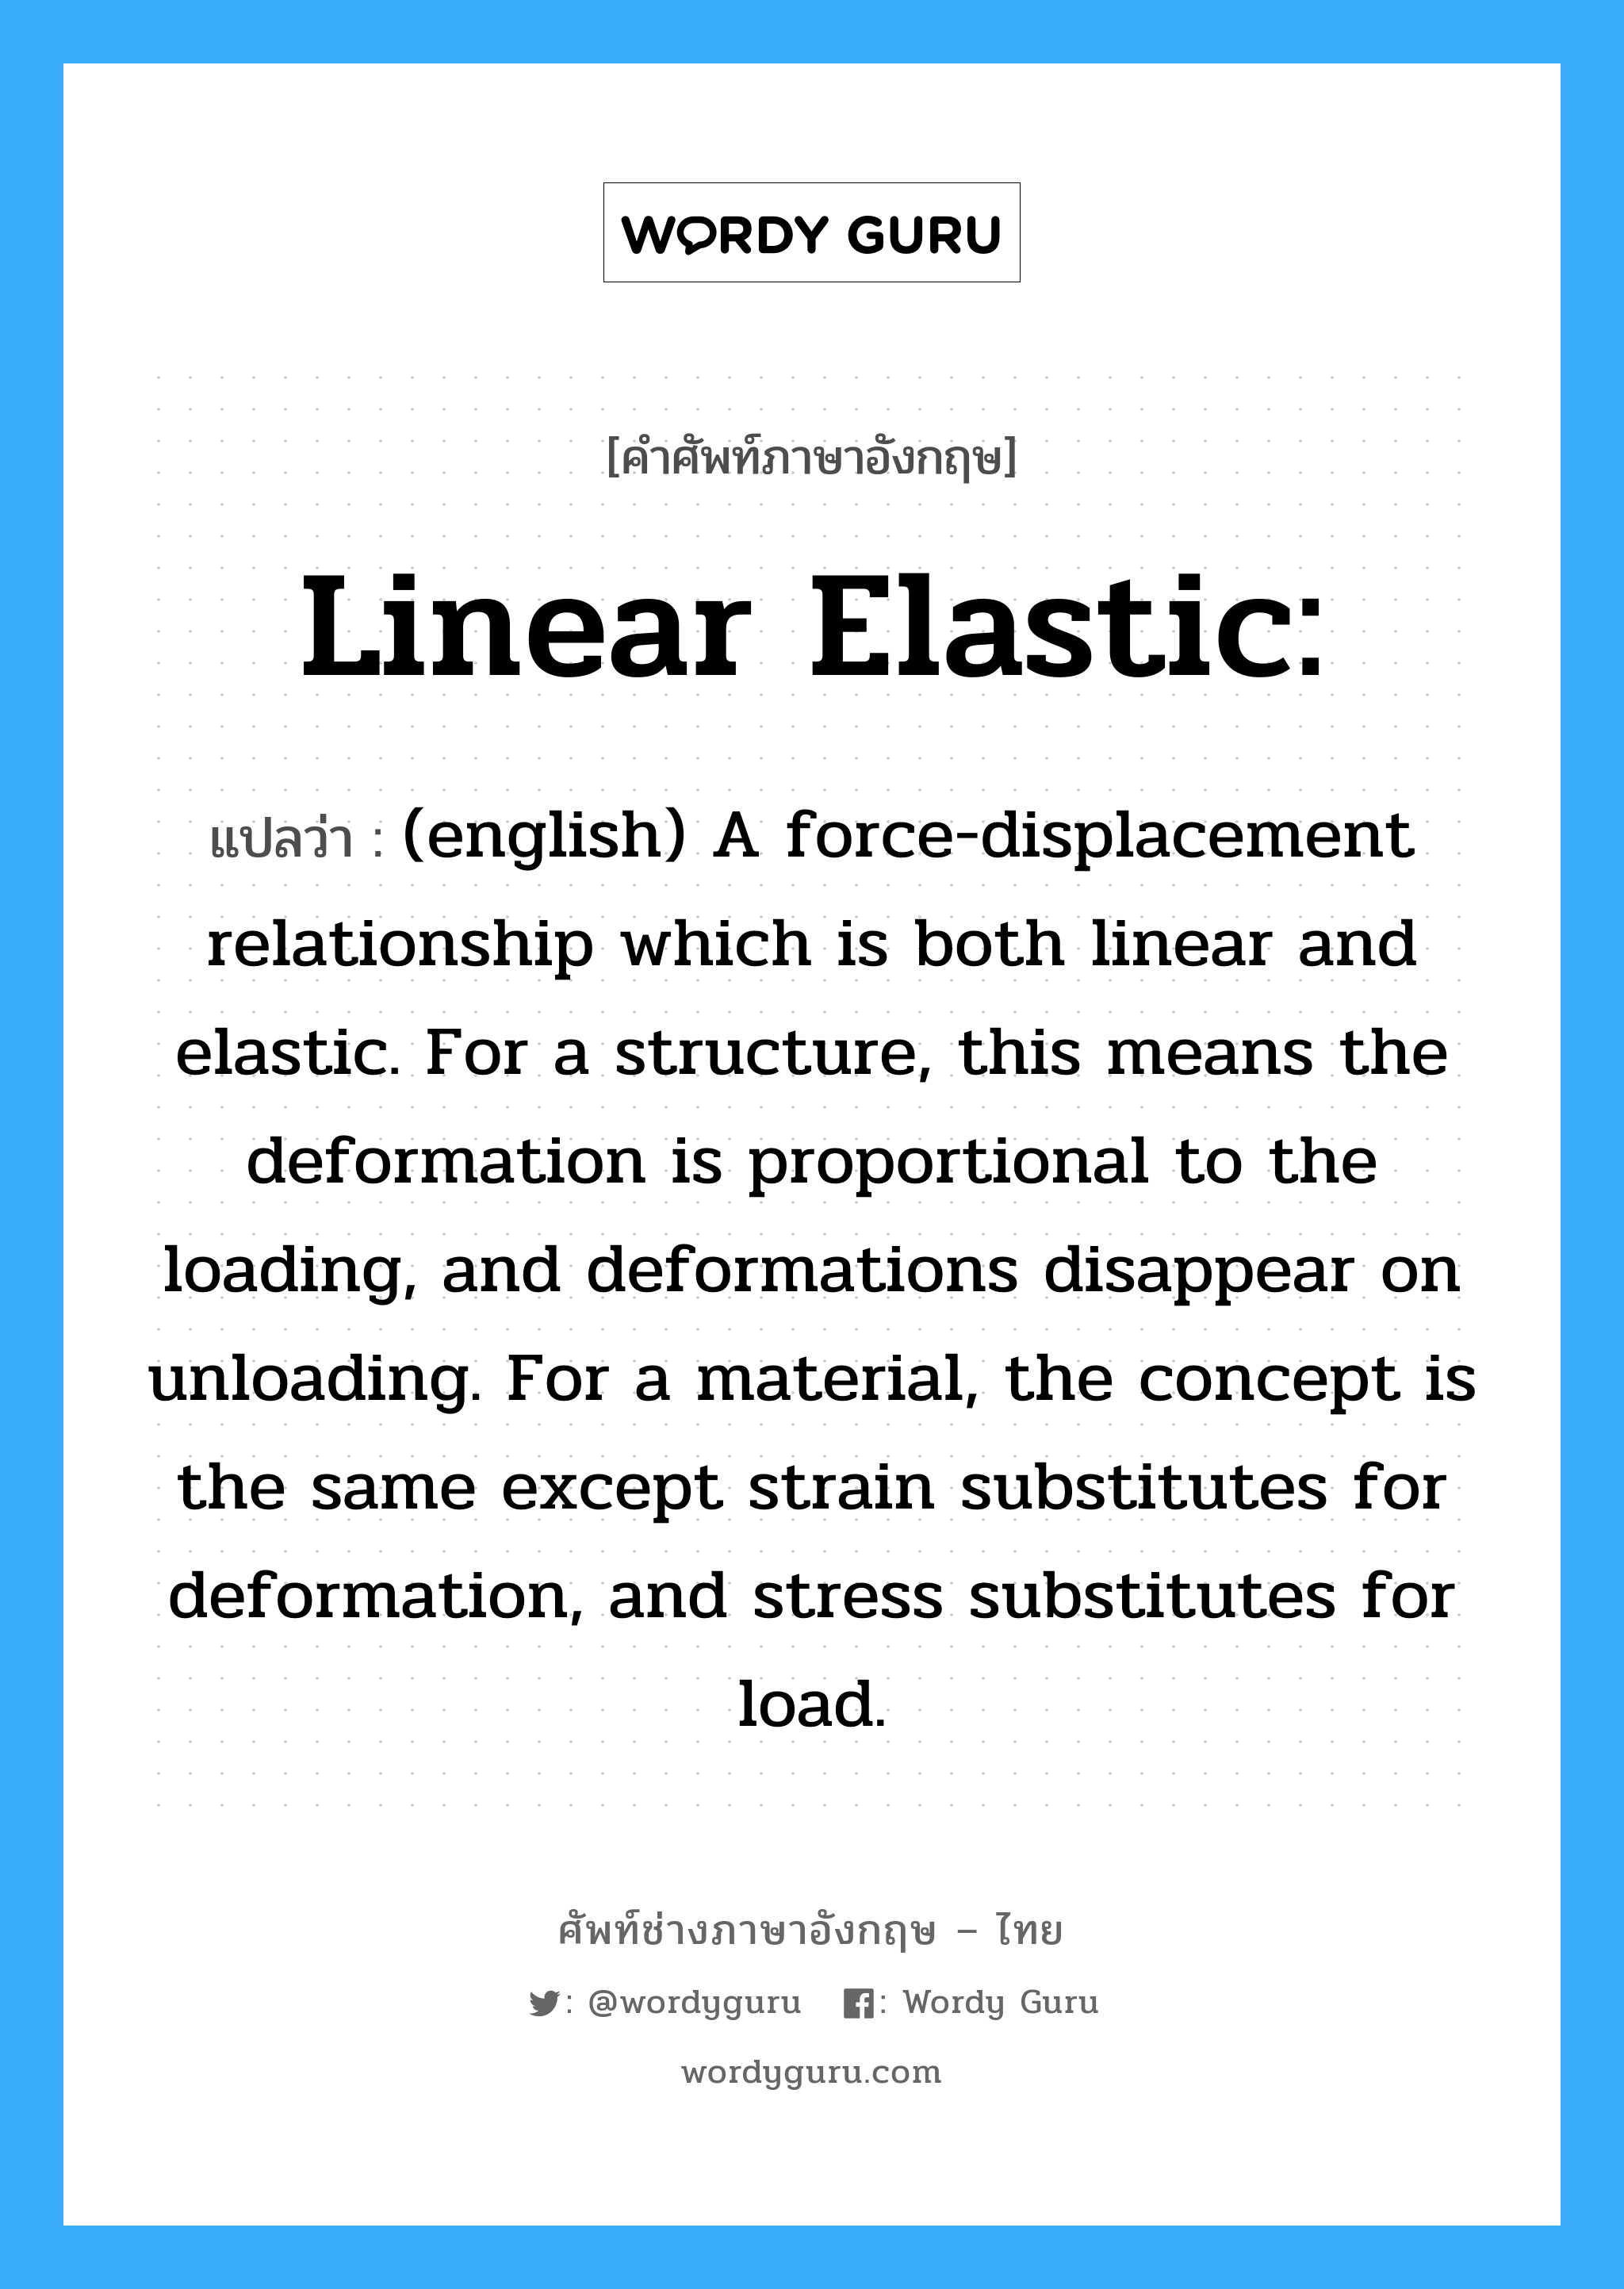 Linear Elastic: แปลว่า?, คำศัพท์ช่างภาษาอังกฤษ - ไทย Linear Elastic: คำศัพท์ภาษาอังกฤษ Linear Elastic: แปลว่า (english) A force-displacement relationship which is both linear and elastic. For a structure, this means the deformation is proportional to the loading, and deformations disappear on unloading. For a material, the concept is the same except strain substitutes for deformation, and stress substitutes for load.